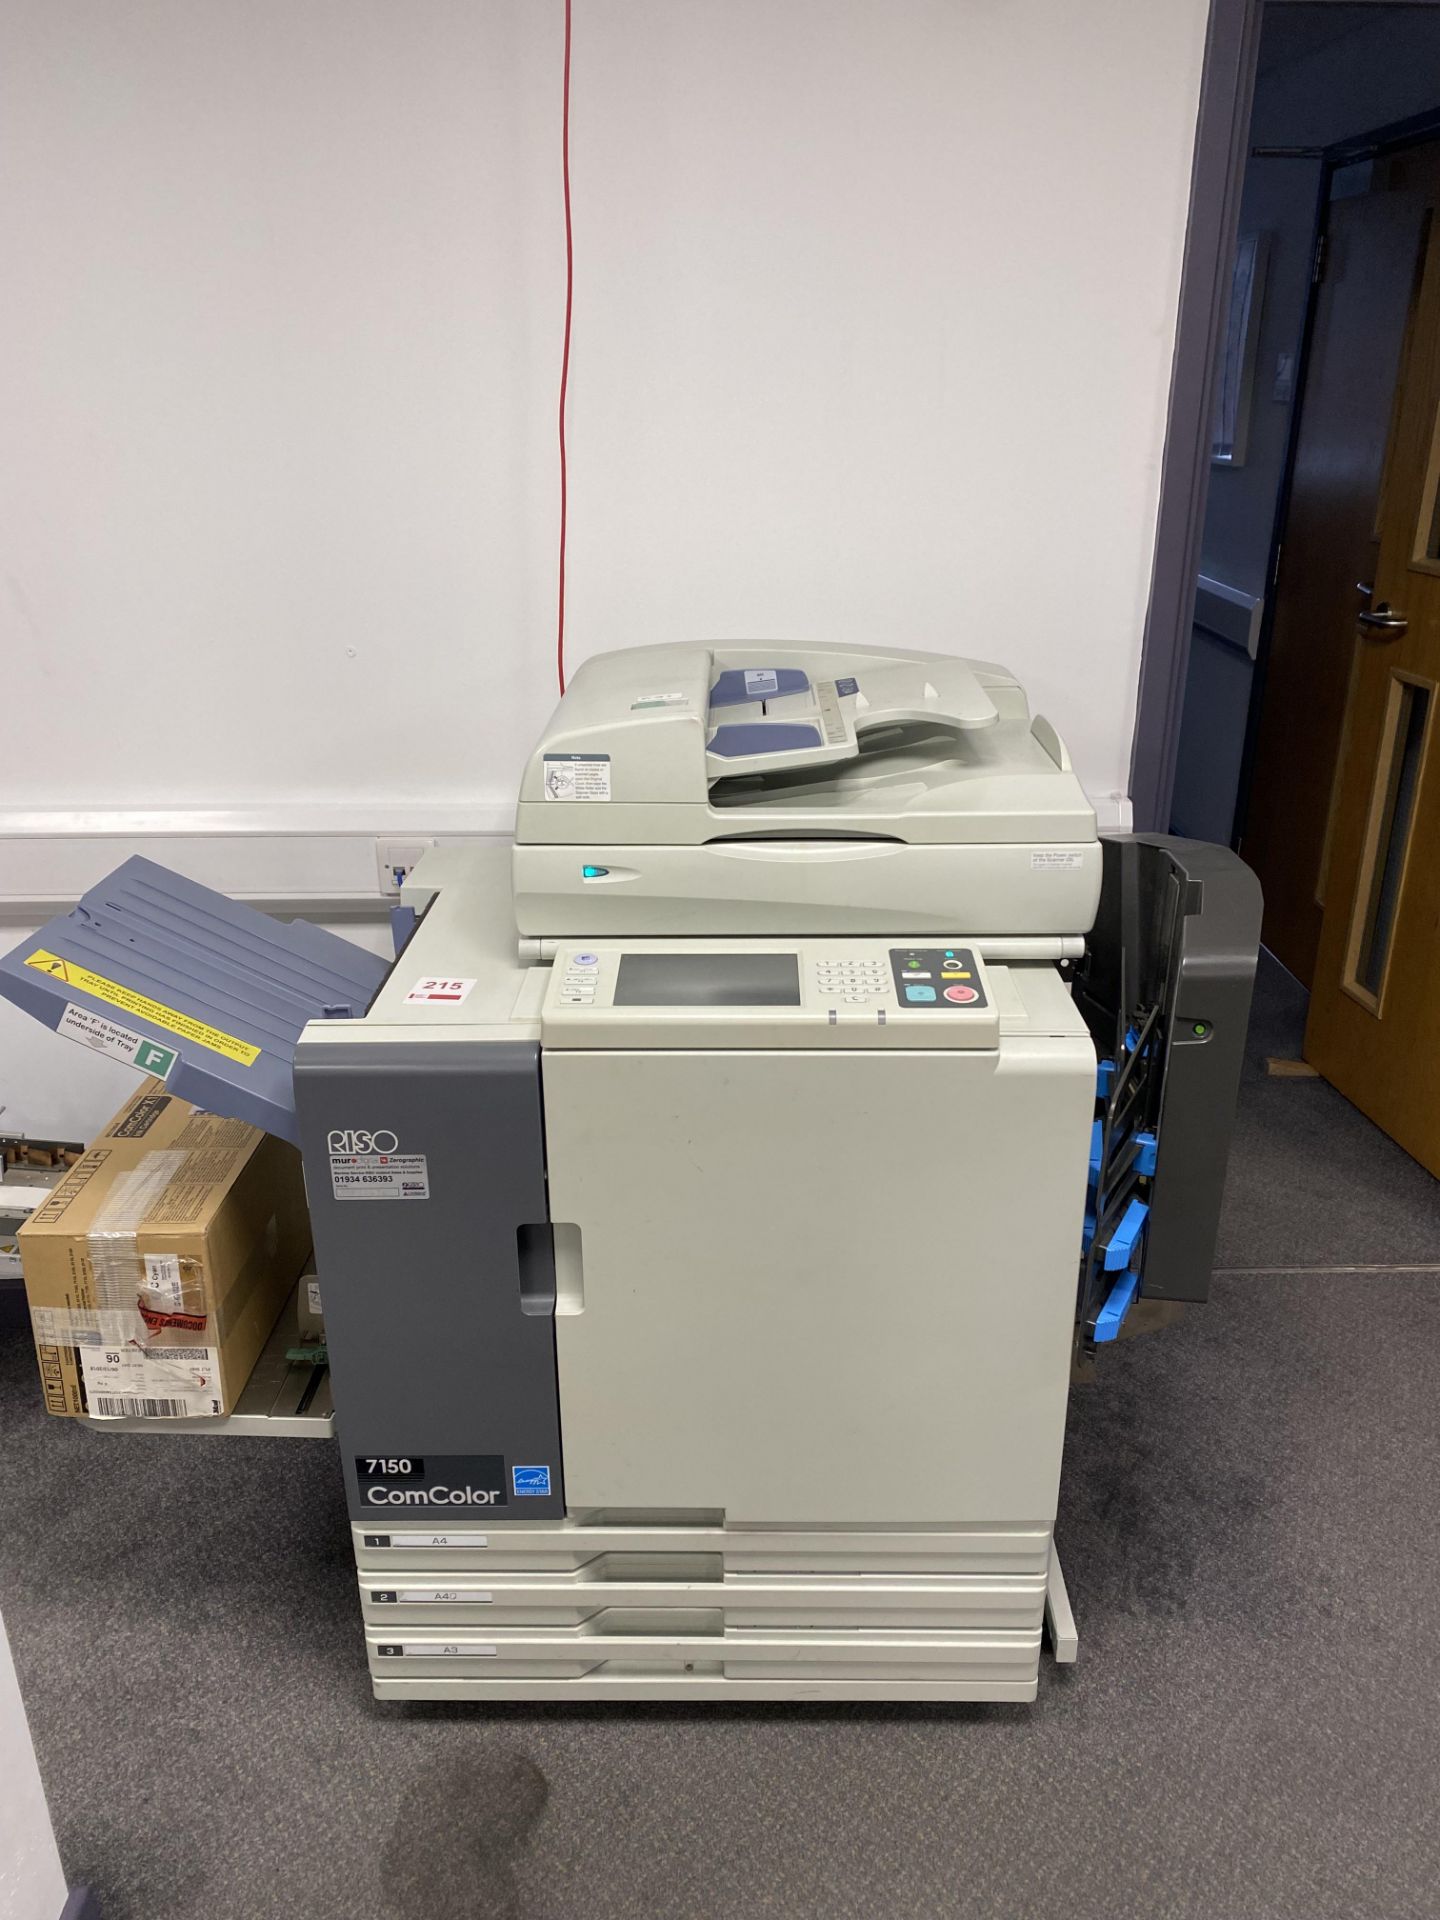 Riso Comcolor 7150 printer (including ink cartridge)